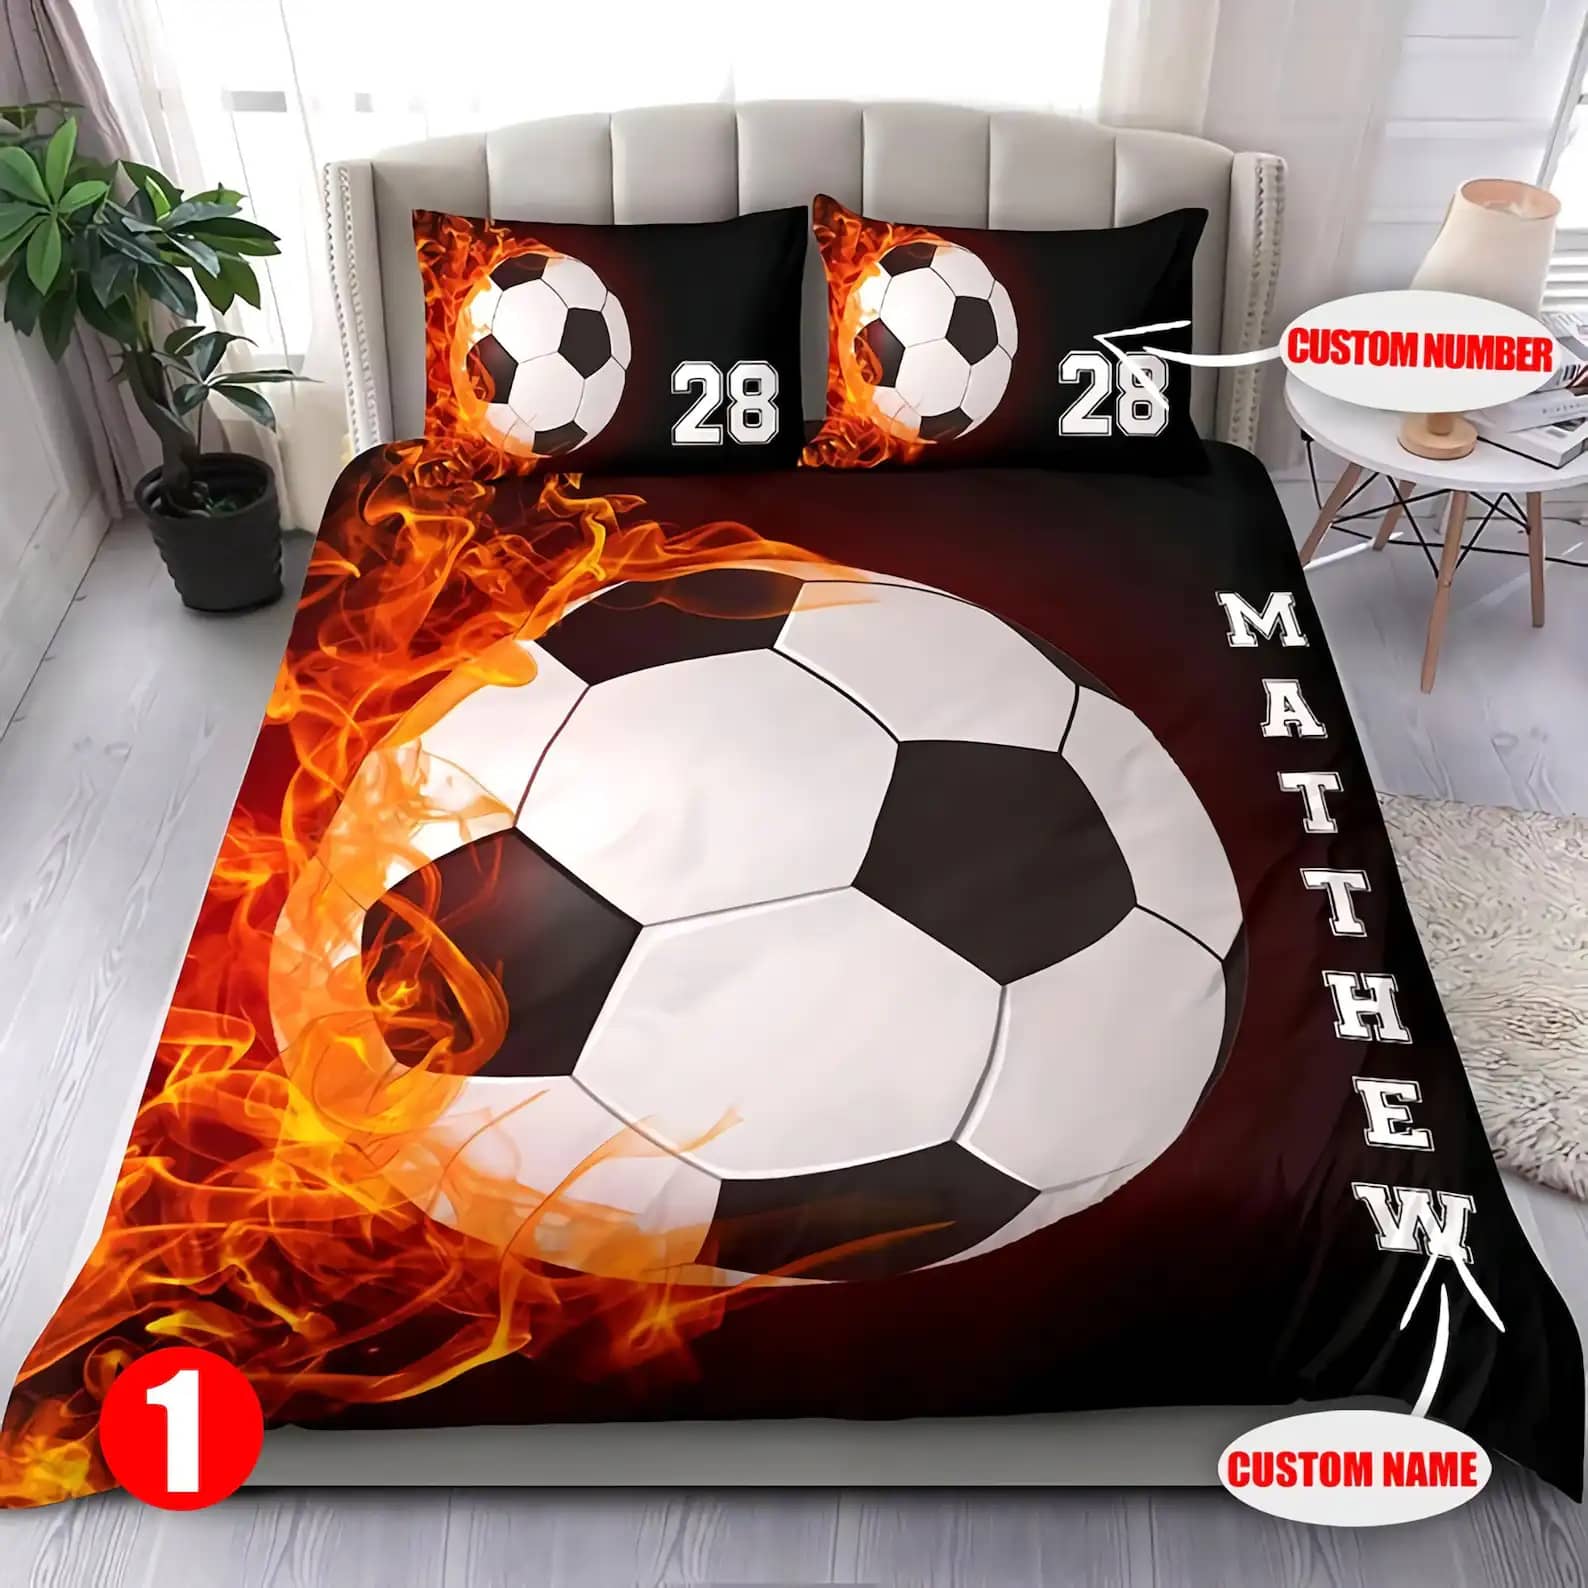 Personalized Soccer Bedding Custom Name And Number Quilt Bedding Sets